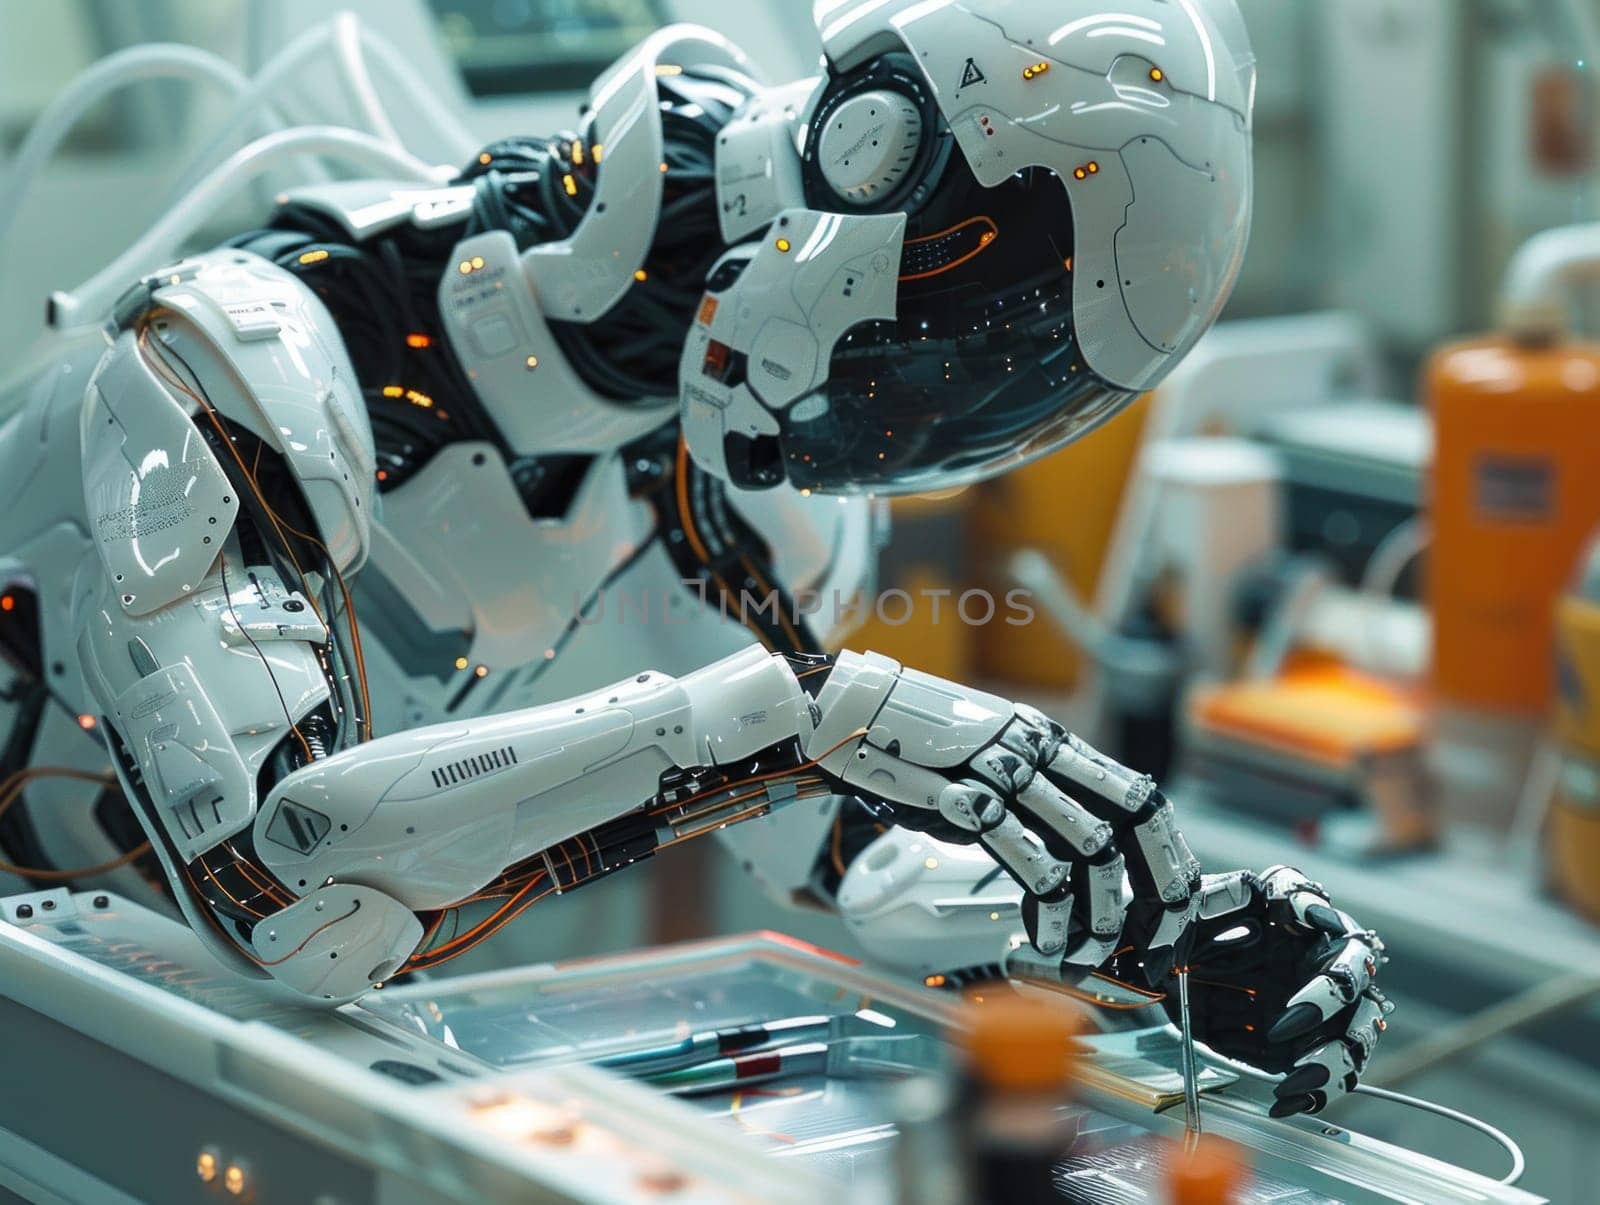 Robot Performing Maintenance on Factory Equipment by but_photo